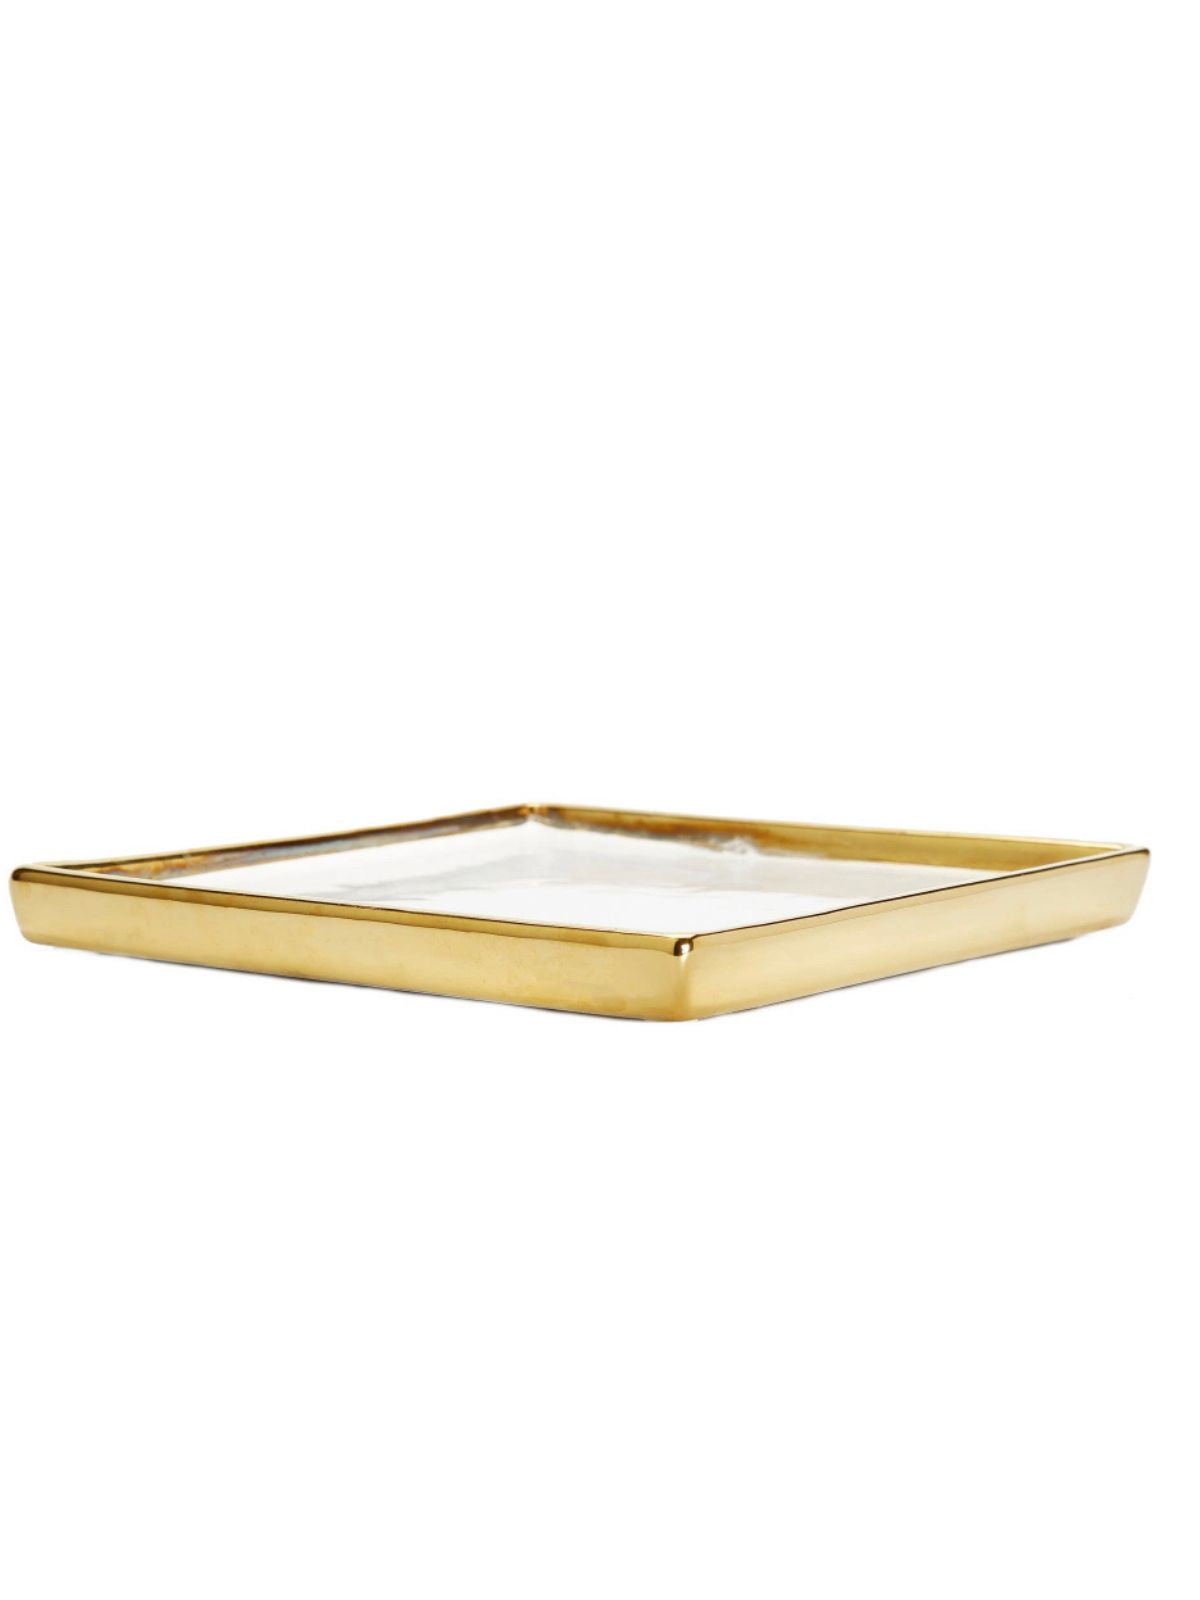 8.75 inch White Square Ceramic Decorative Tray with Luxury Gold Edges.